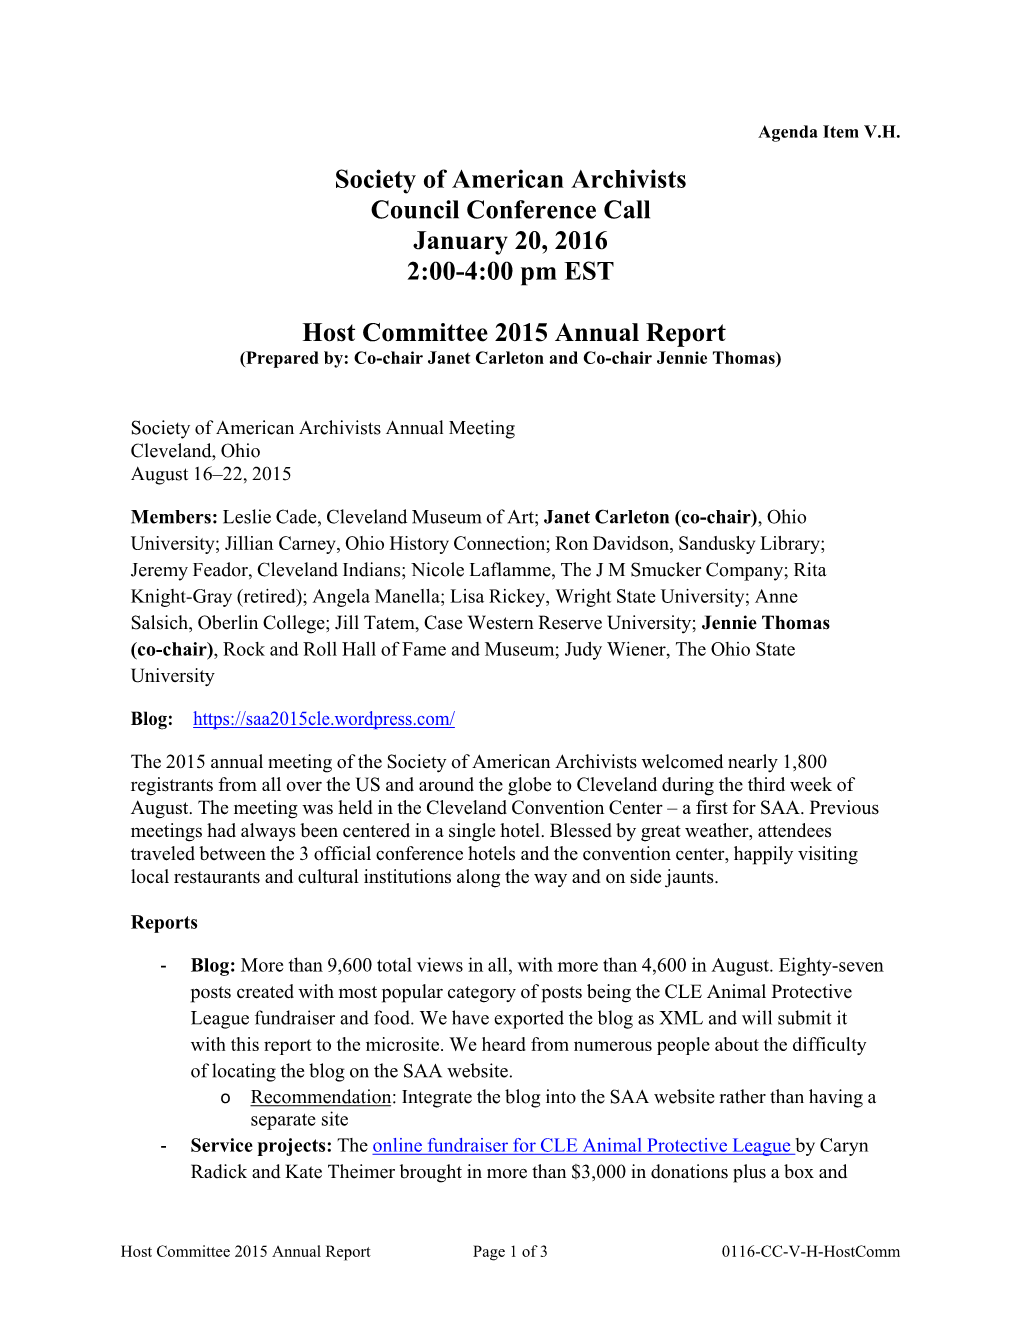 Society of American Archivists Council Conference Call January 20, 2016 2:00-4:00 Pm EST Host Committee 2015 Annual Report